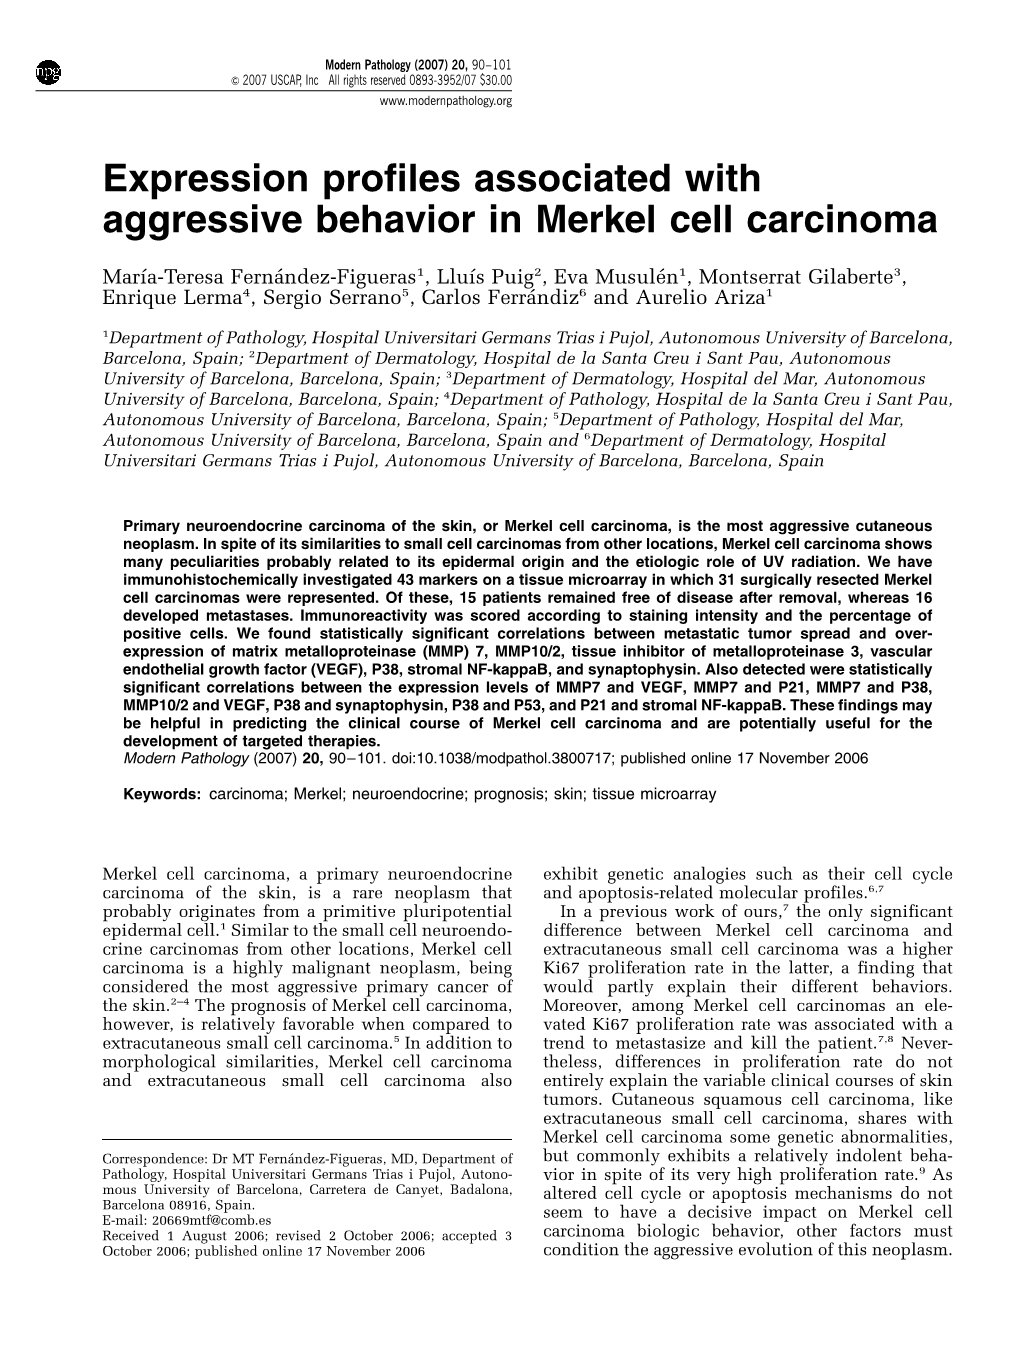 Expression Profiles Associated with Aggressive Behavior in Merkel Cell Carcinoma